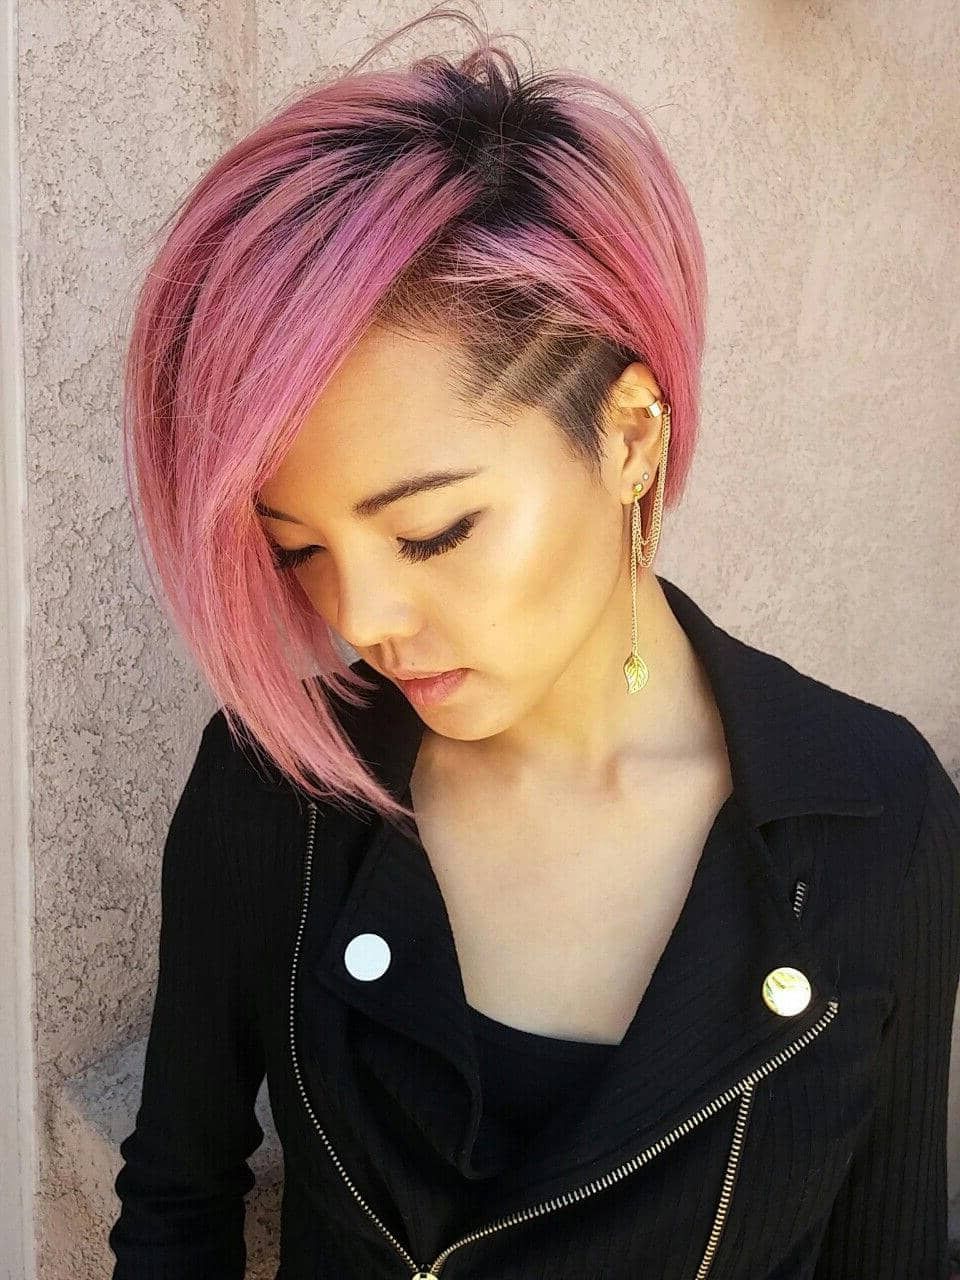 50 Pixie Haircuts You'll See Trending In 2018 Regarding Short Haircuts With One Side Longer Than The Other (View 12 of 25)